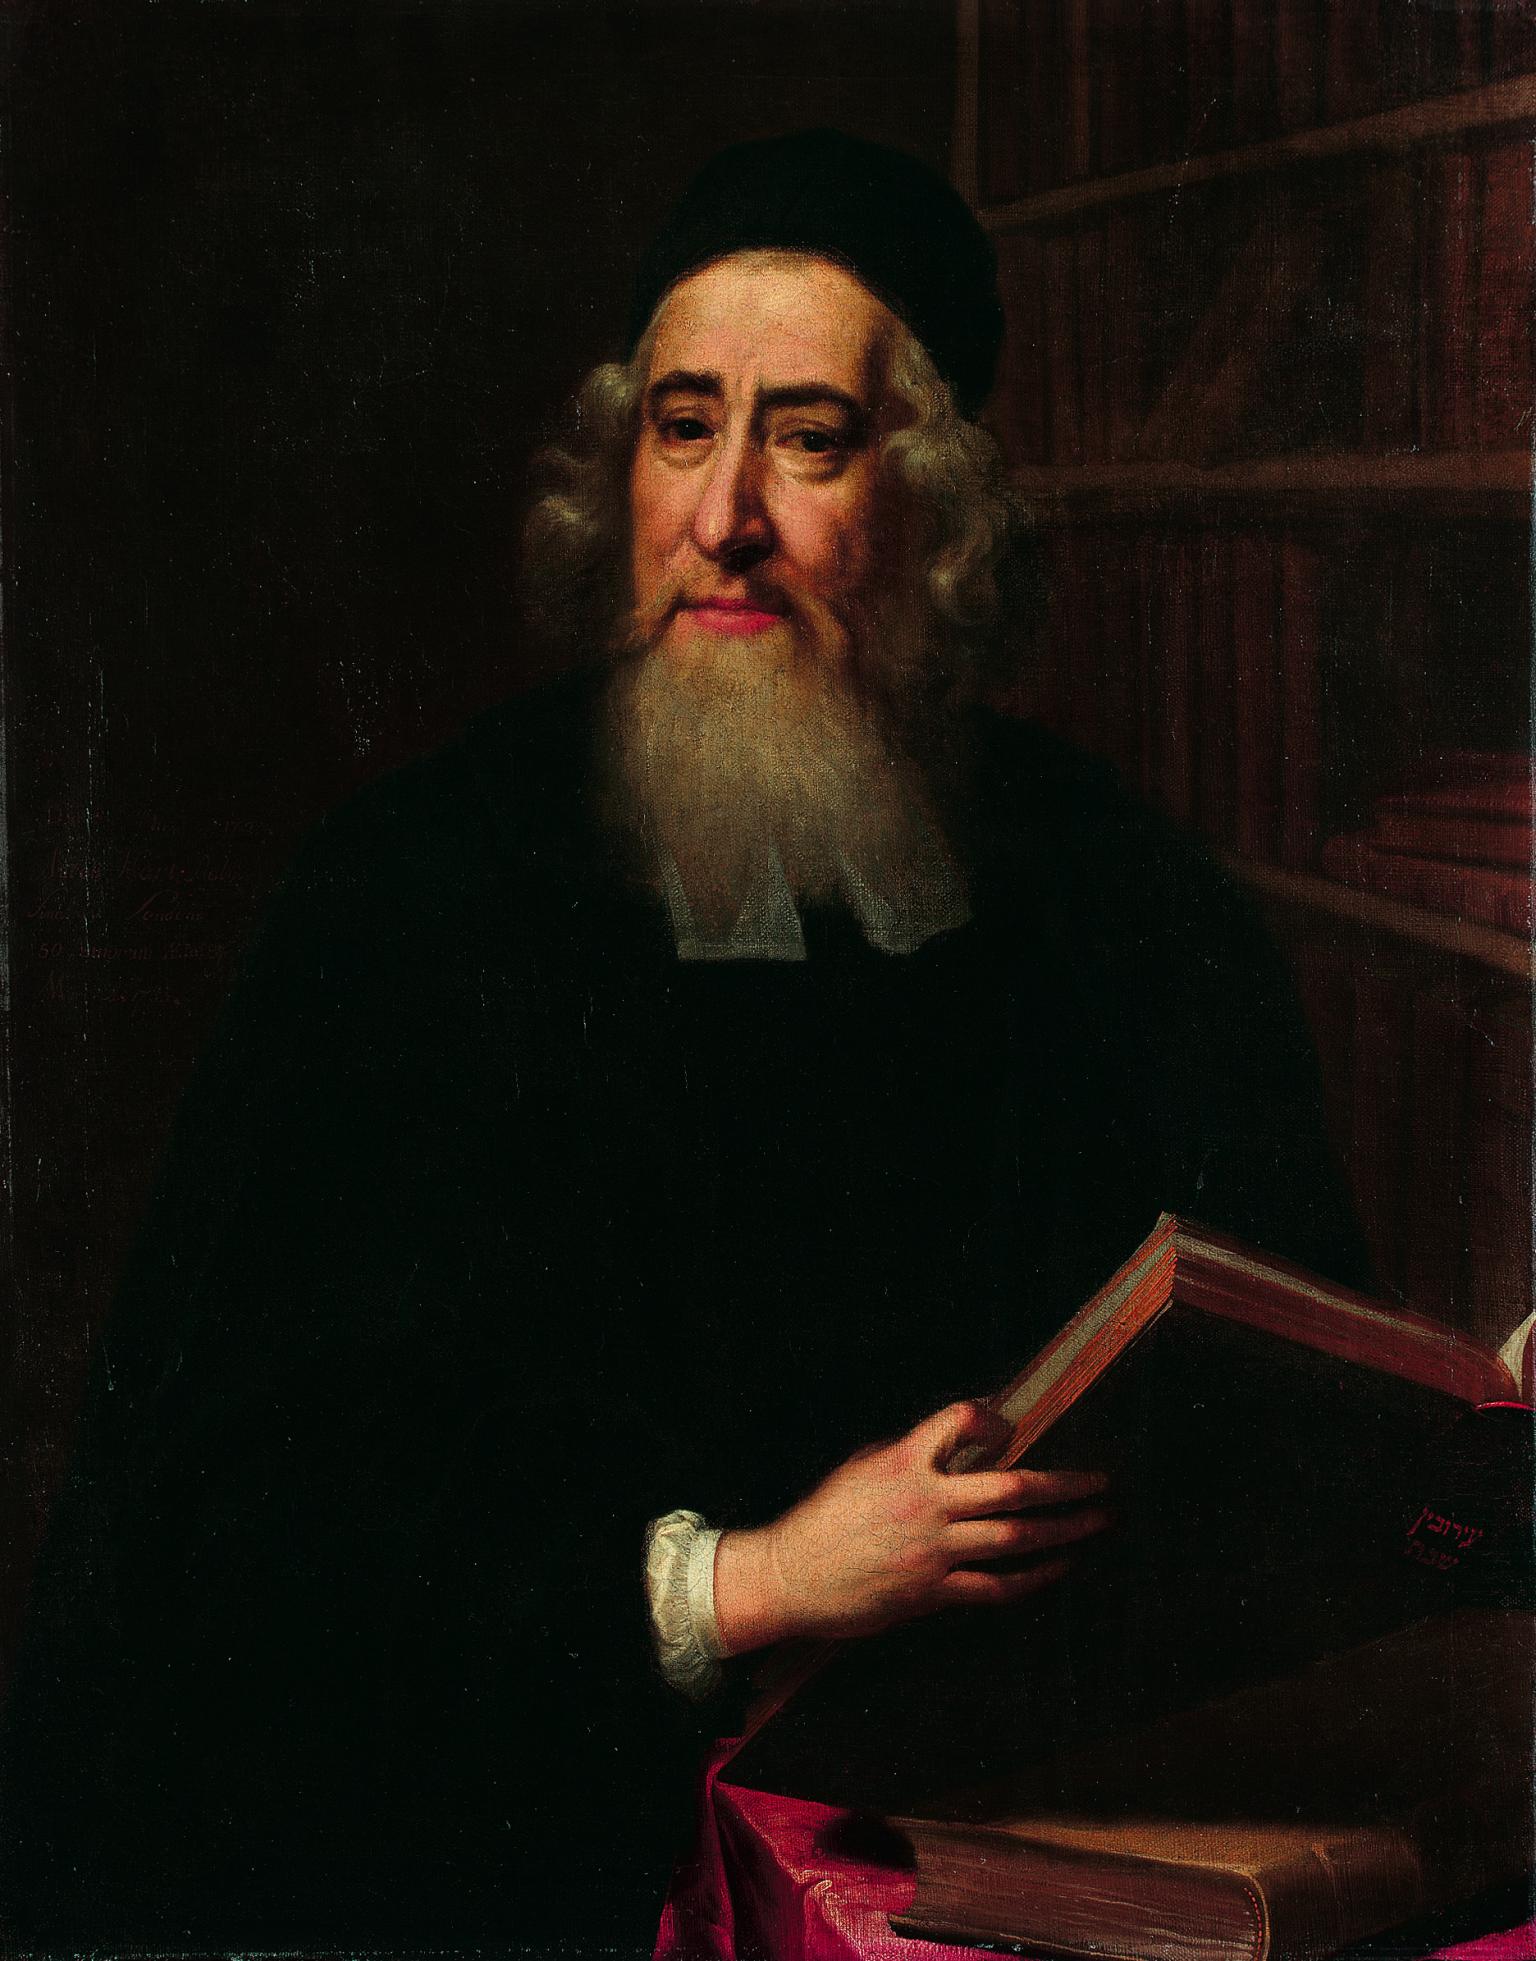 Portrait painting of man in beard and hat holding open book and looking at viewer.